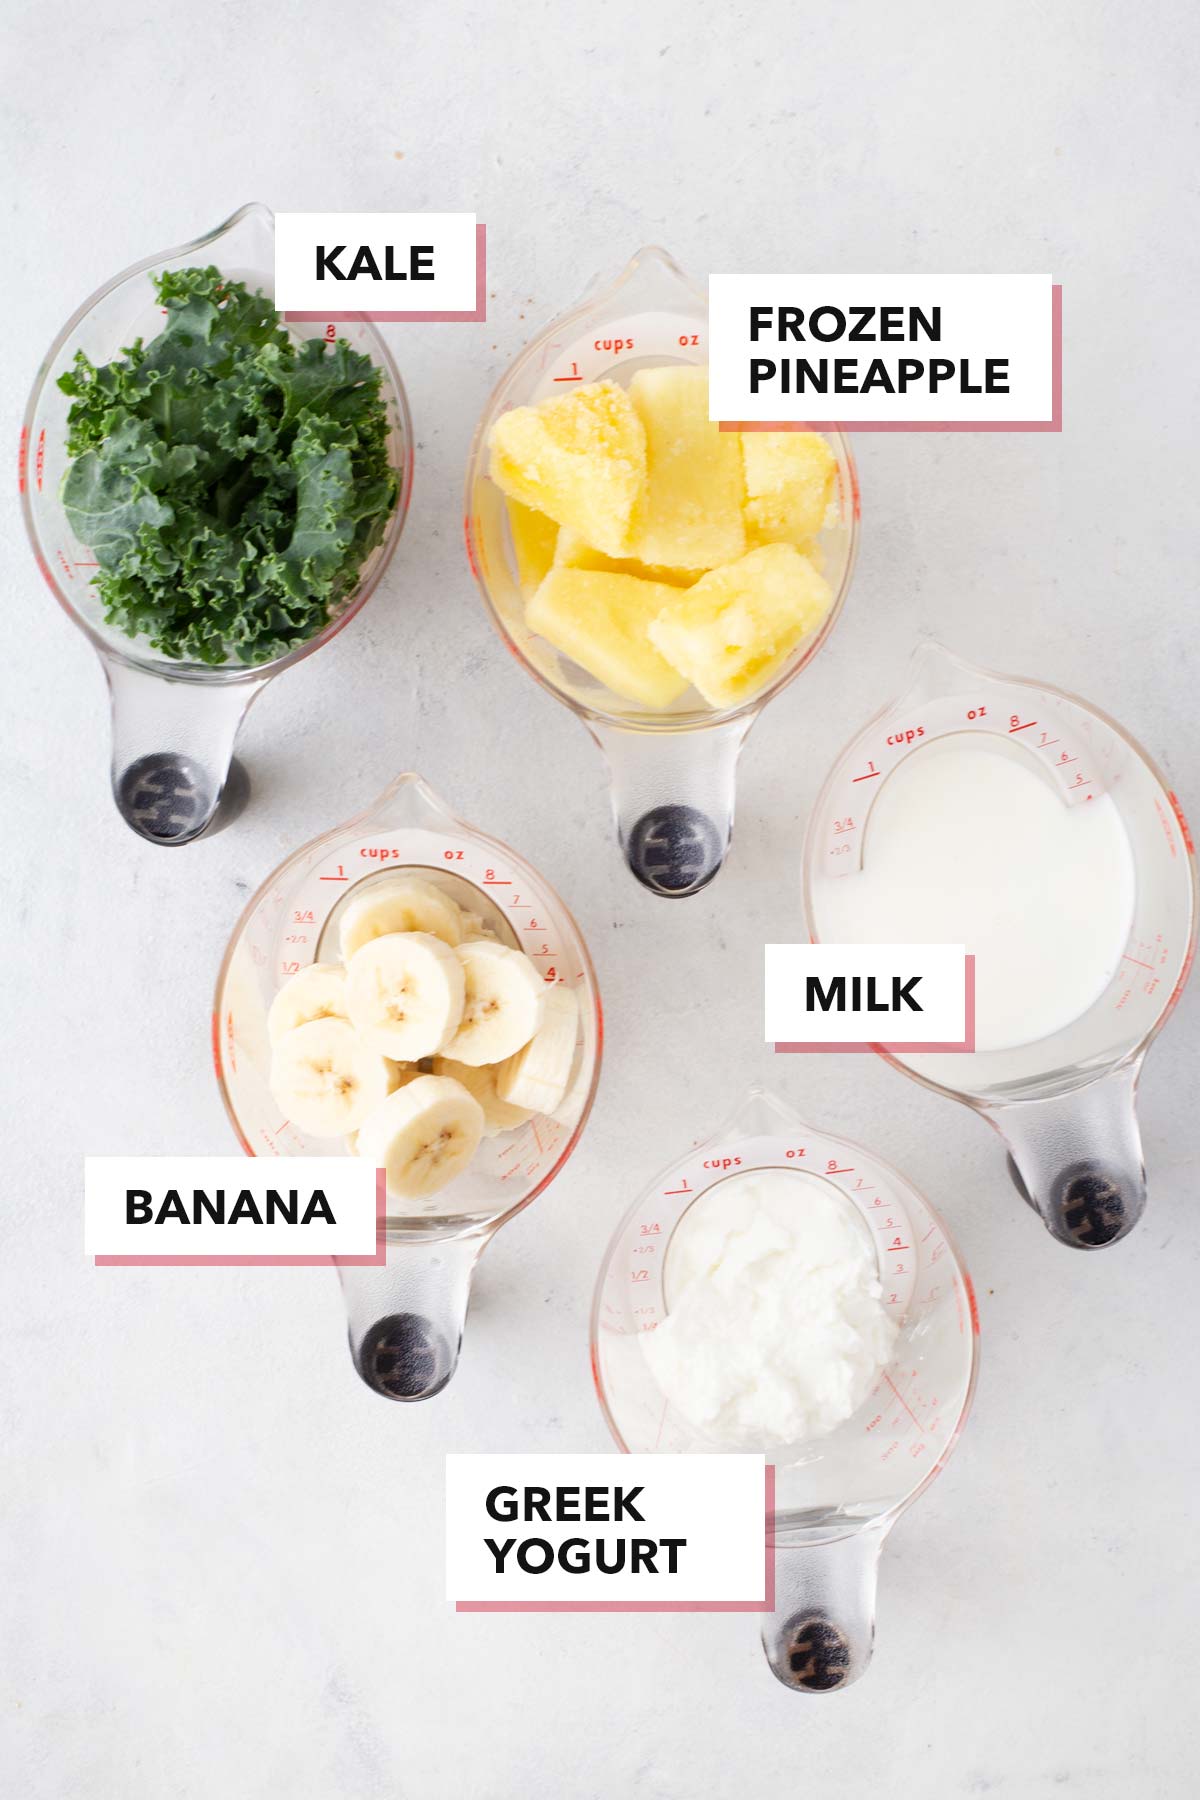 Ingredients for a kale pineapple smoothie on a table.